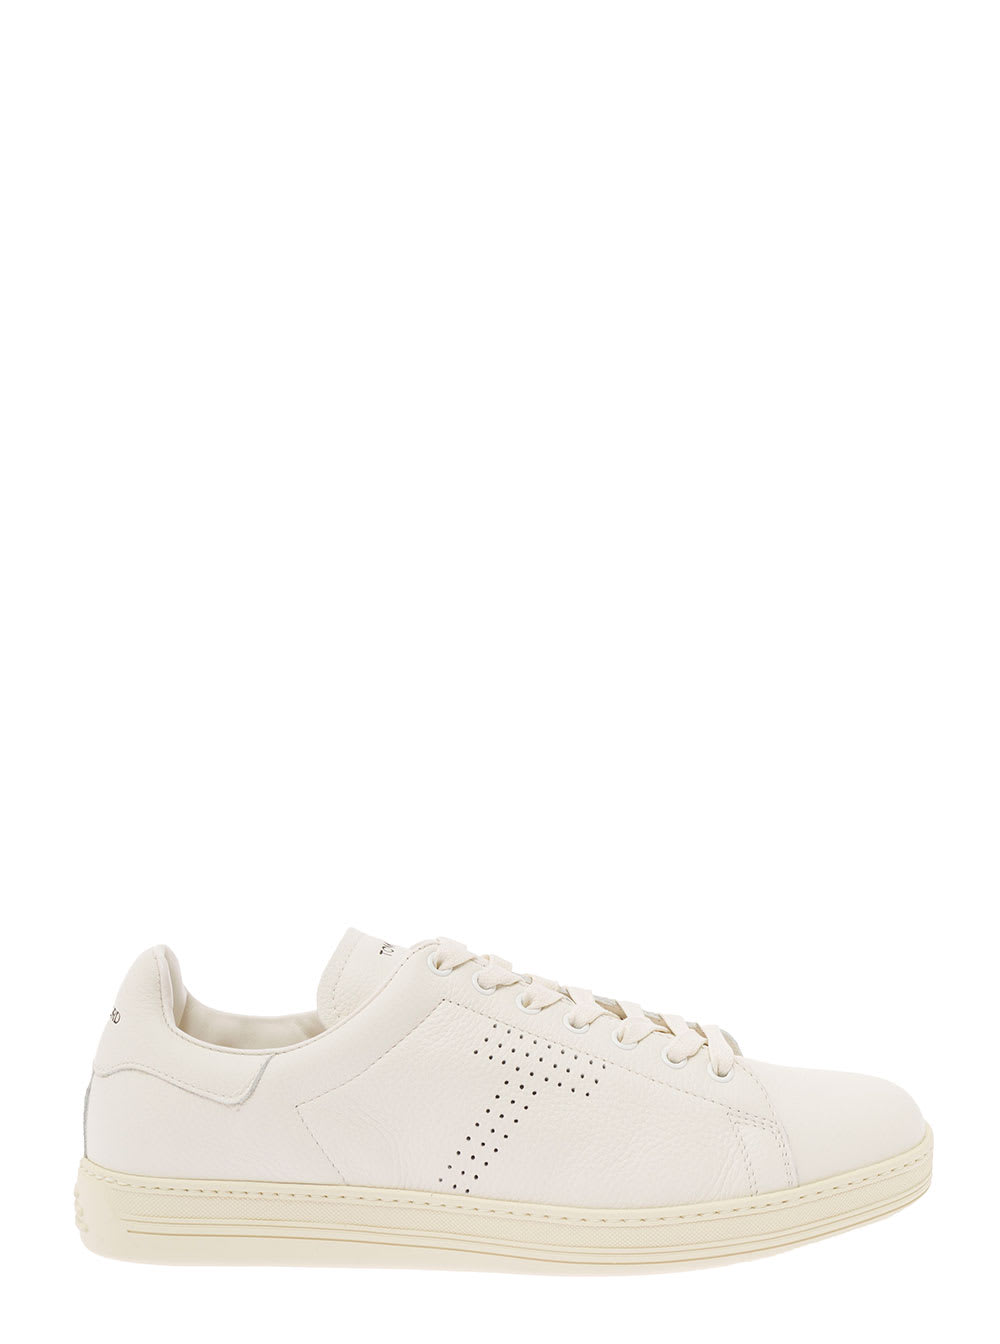 White Worrick Low-top Sneakers In Leather With Punch-hole Monogram Logo Tom Ford Man